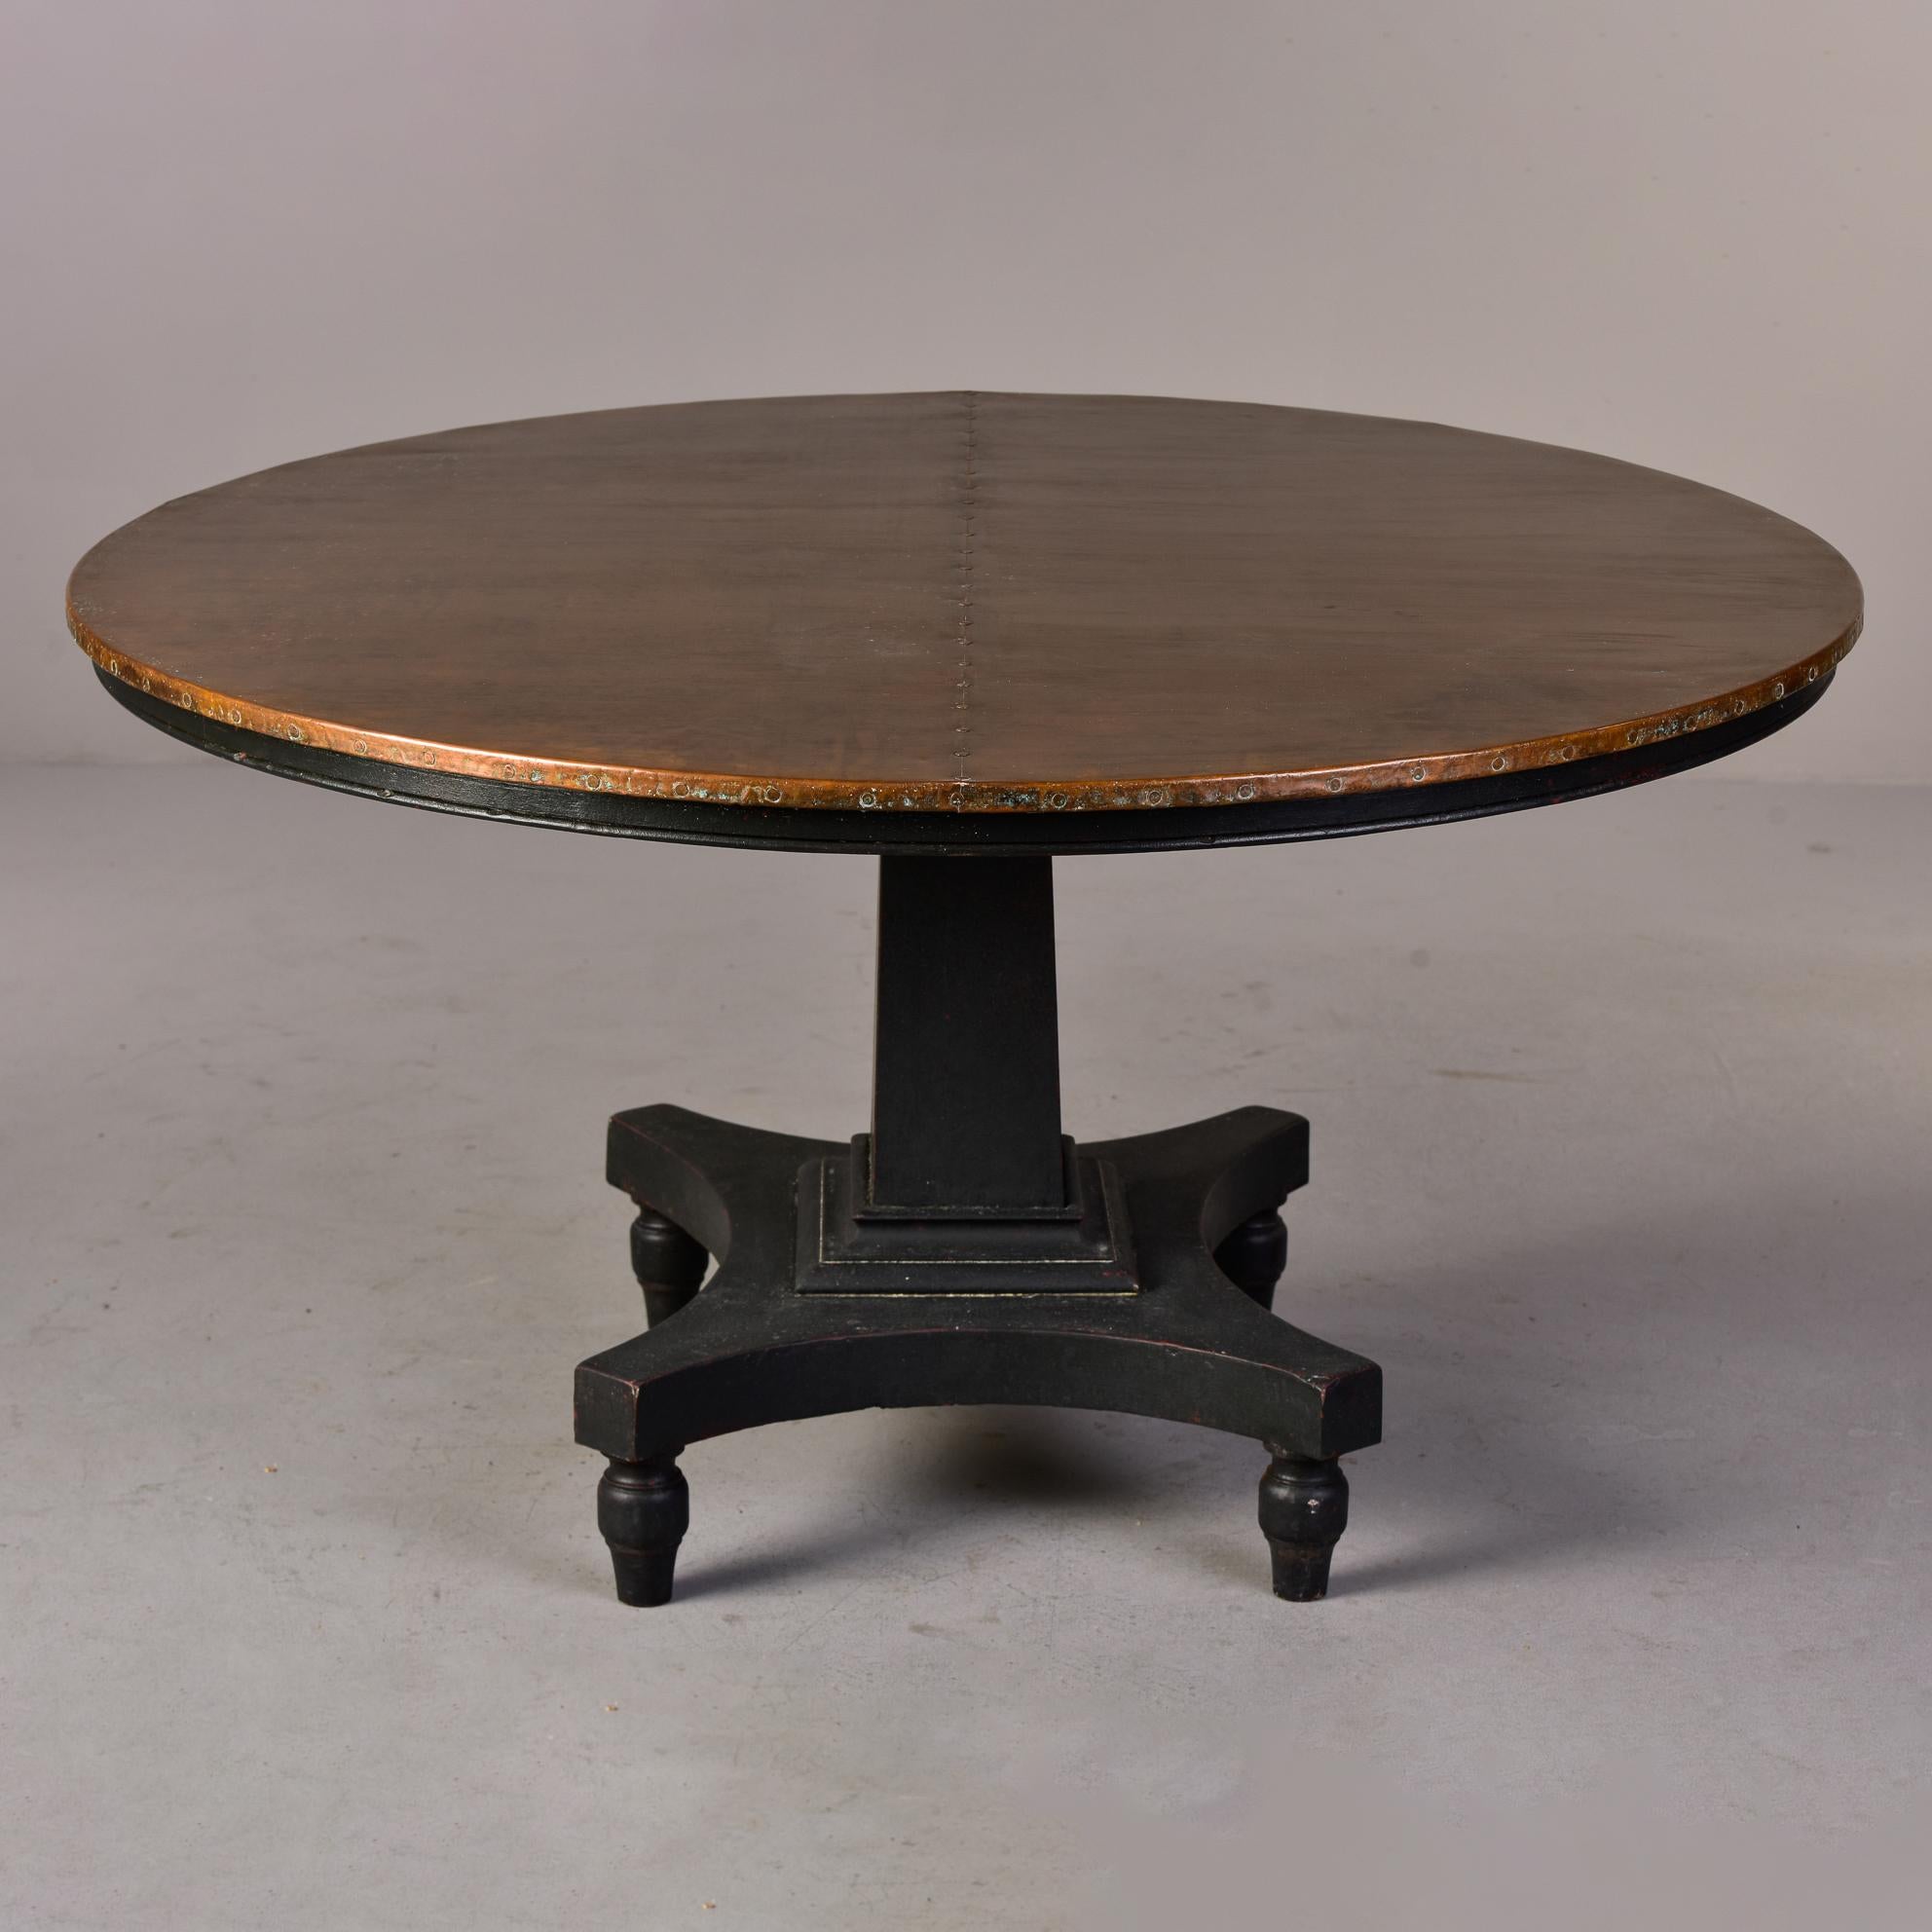 Circa 1900 English round mahogany table has a painted black base with new copper top. Unknown maker. 

Base Only: 28.5” H x 27.5” W x 23.5” D.